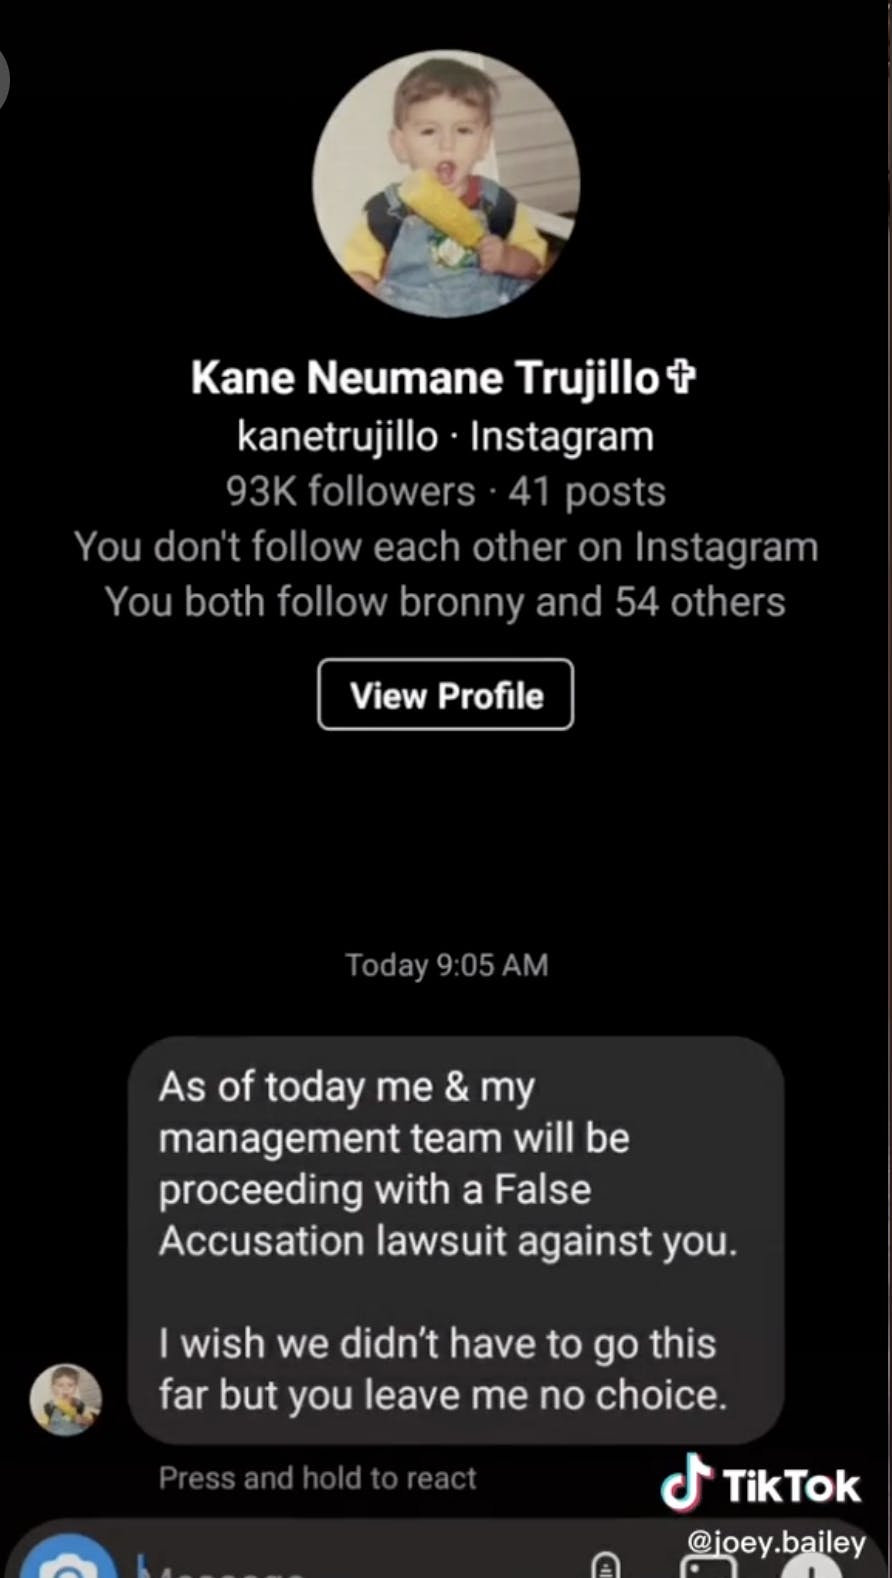 Alleged DMs sent from Trujillo to Bailey